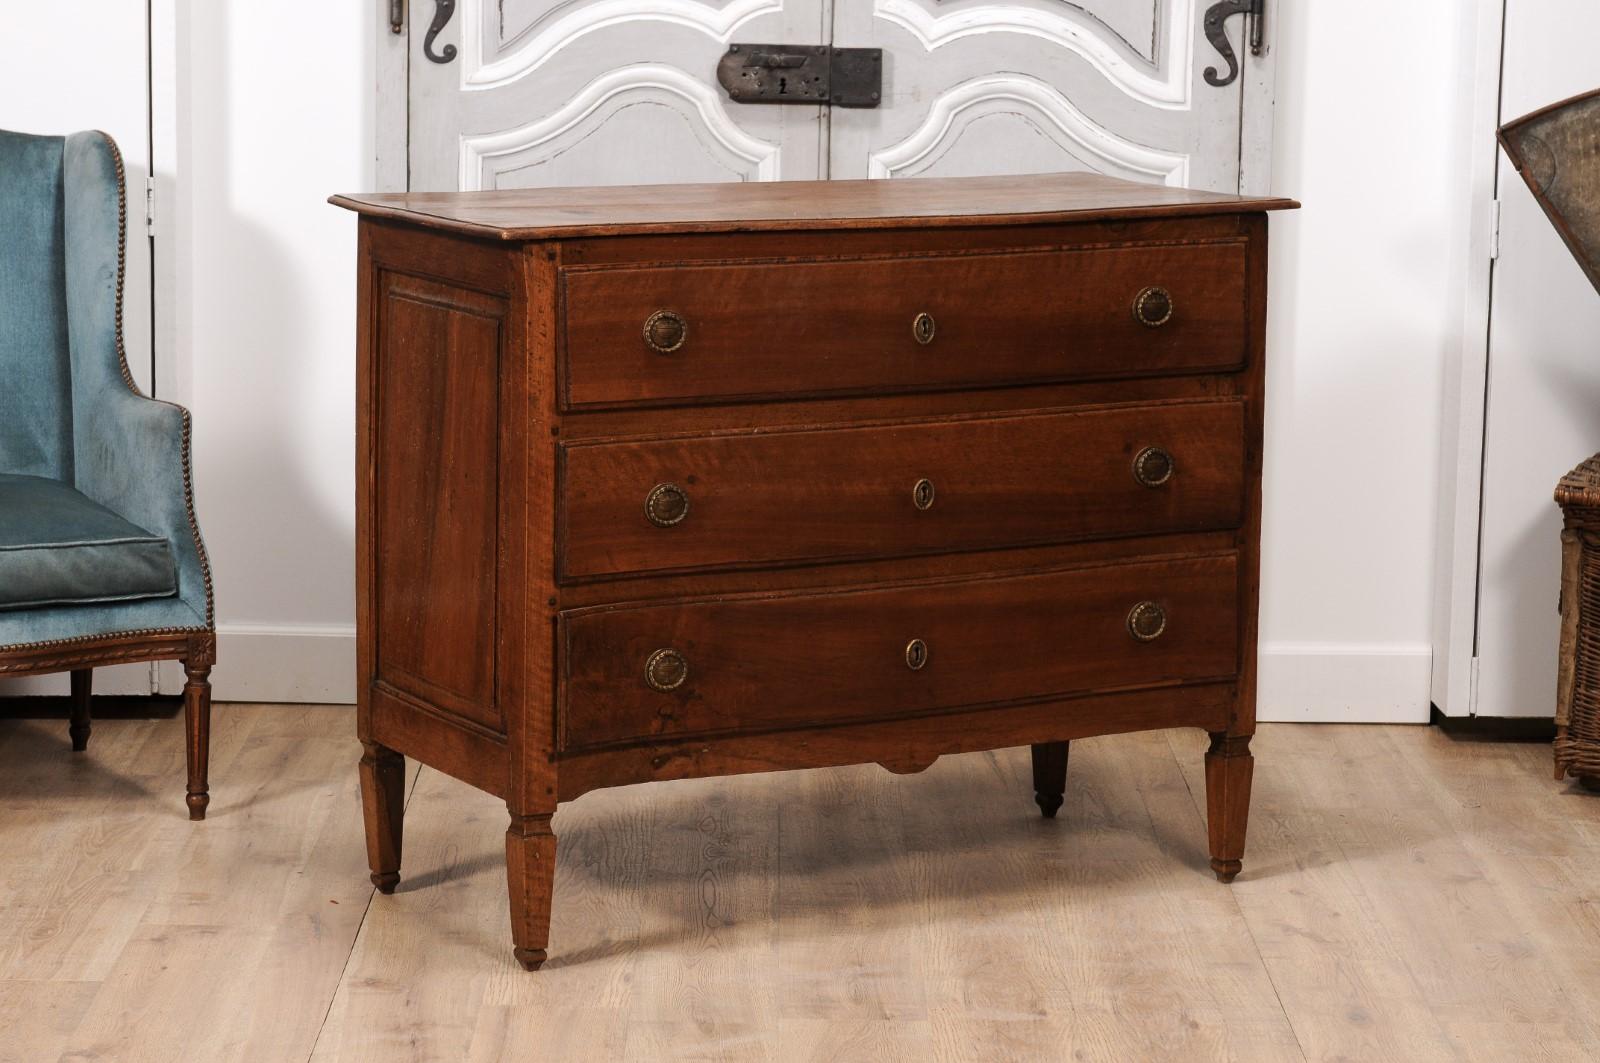 An Italian walnut commode from circa 1820 with serpentine front and carved tapered feet. Introduce a dash of Italian allure into your home with this walnut commode, hailing from the rich artistic landscapes of the 1820s. Marrying practicality and